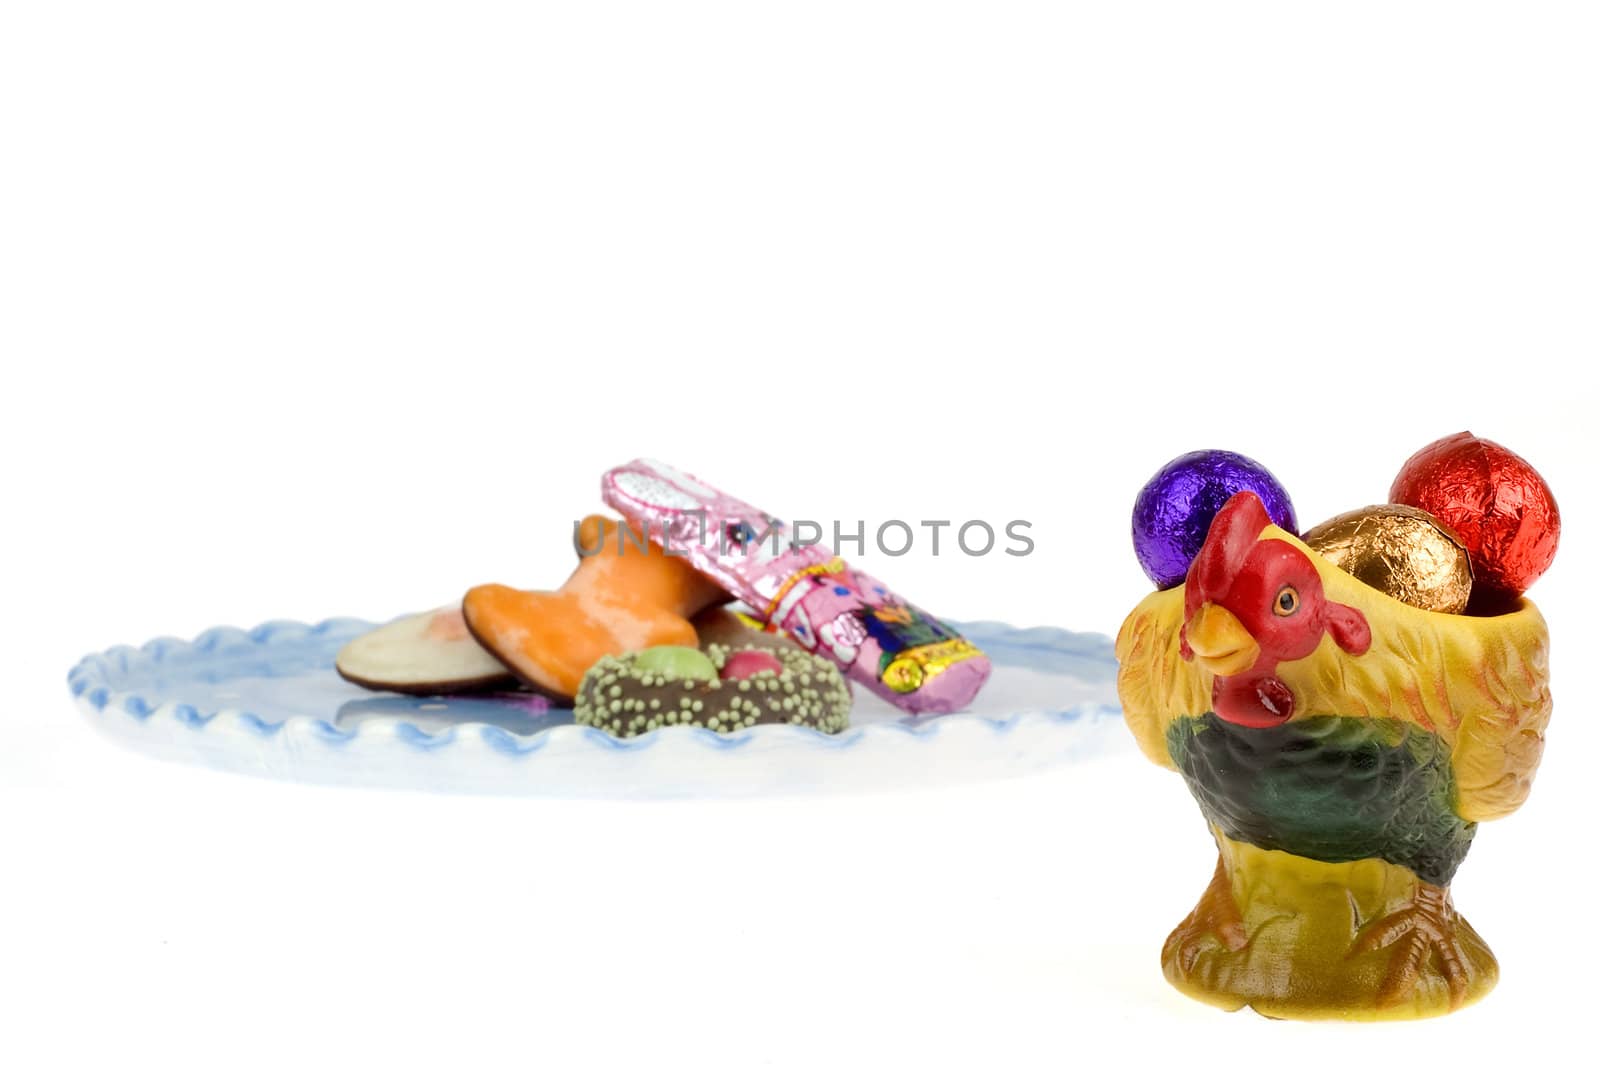 chocolate eggs in a egg cup with a plate on the back with chocolate candies